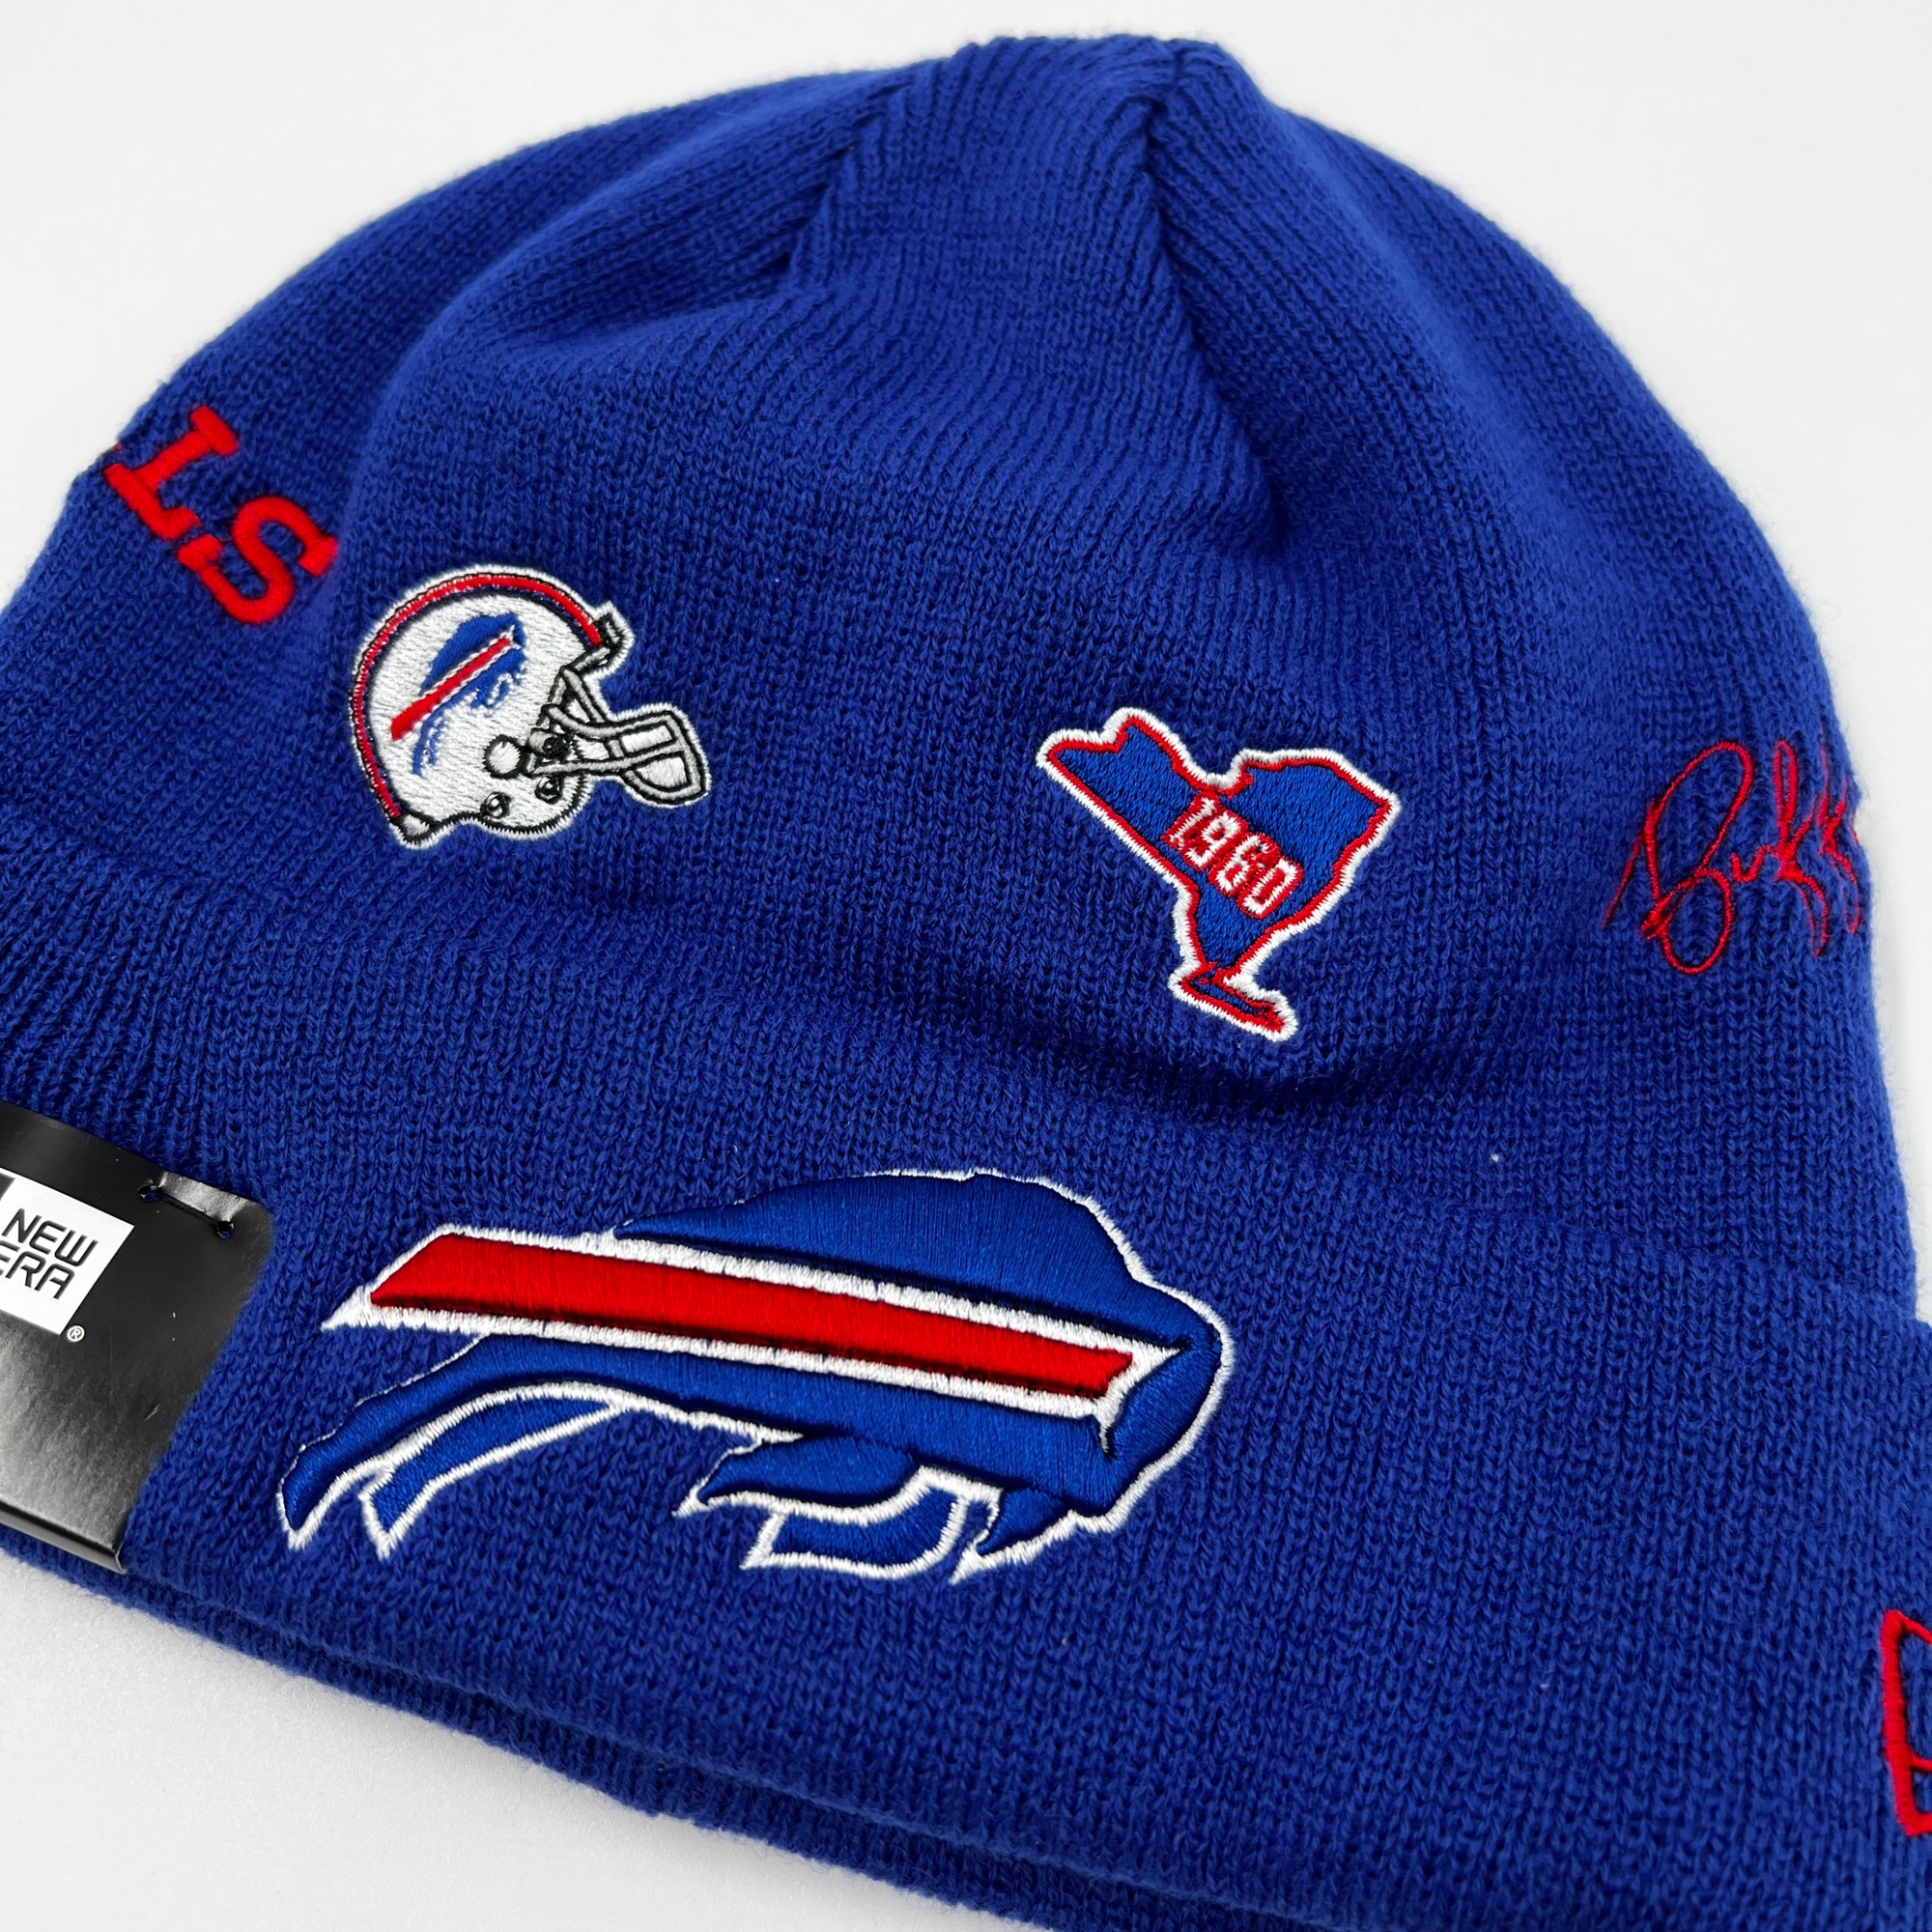 New Era Bills With Embroidered Team Logos Knit Hat